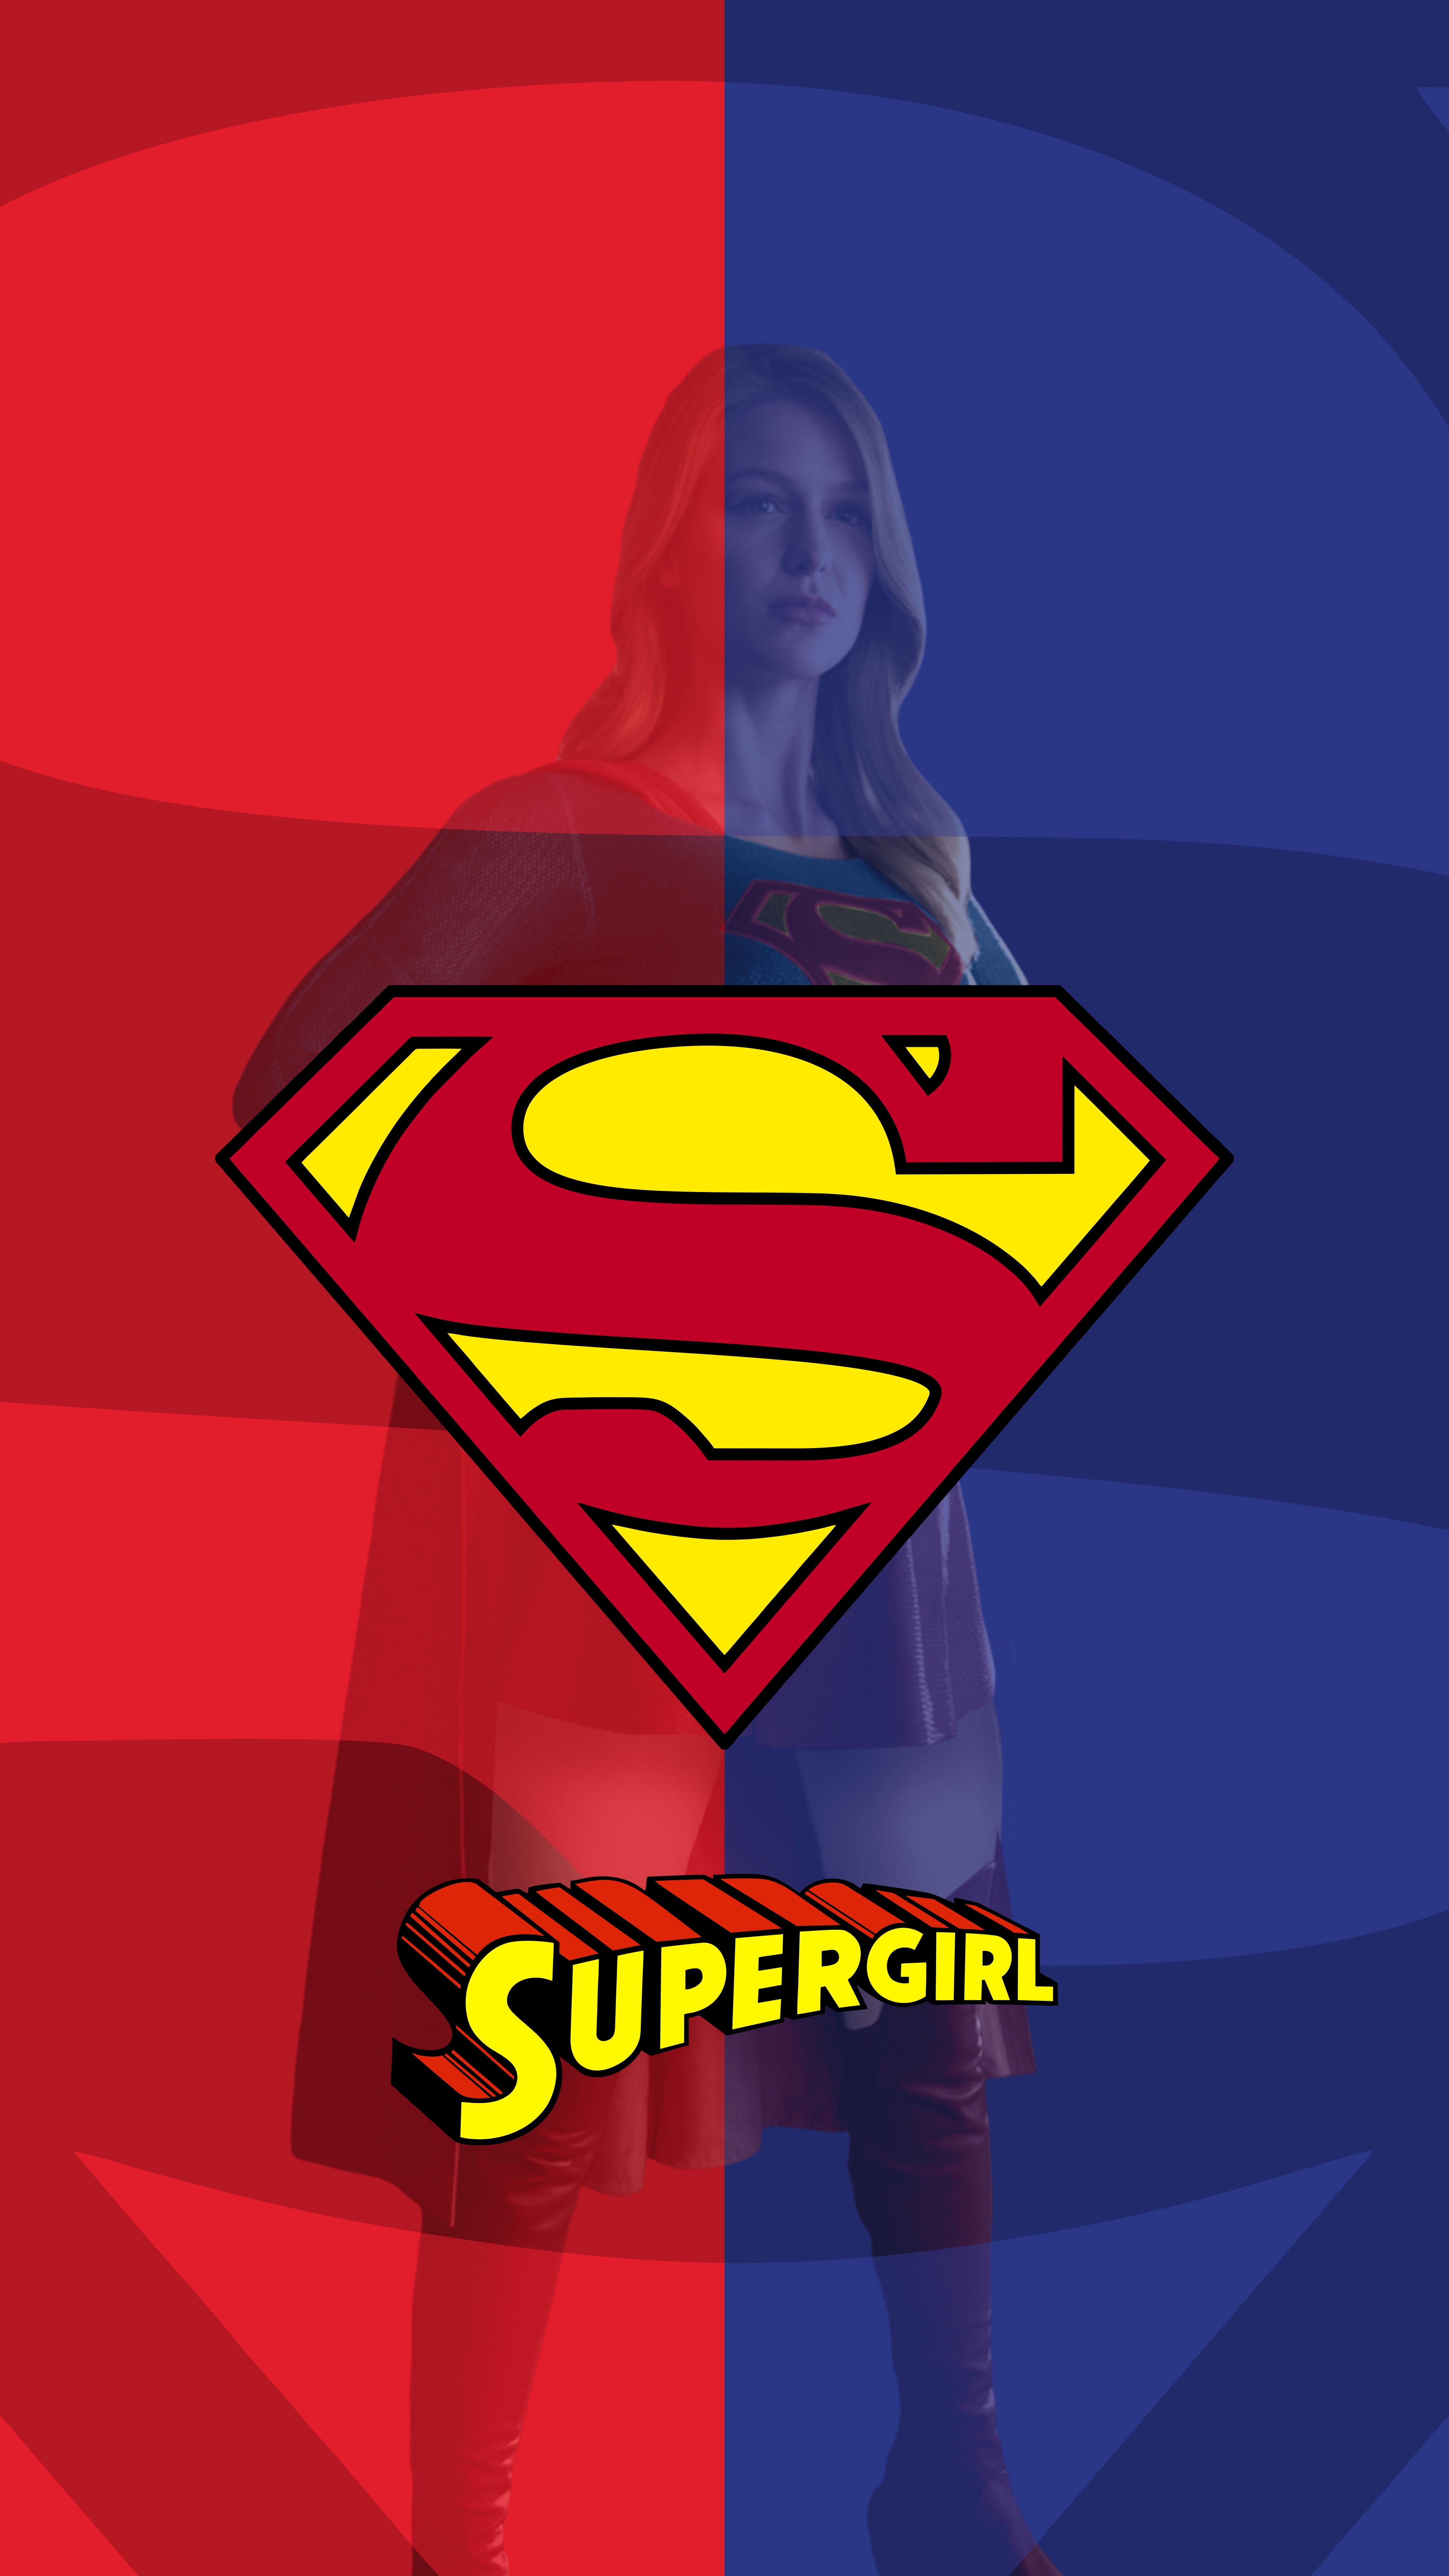 Android IPhone HD Wallpaper: SUPERGIRL #DC #DCEU #DCComics #Supergirl #Kara El #Kara. Superman Wallpaper, Superman Wallpaper Logo, Superman Artwork